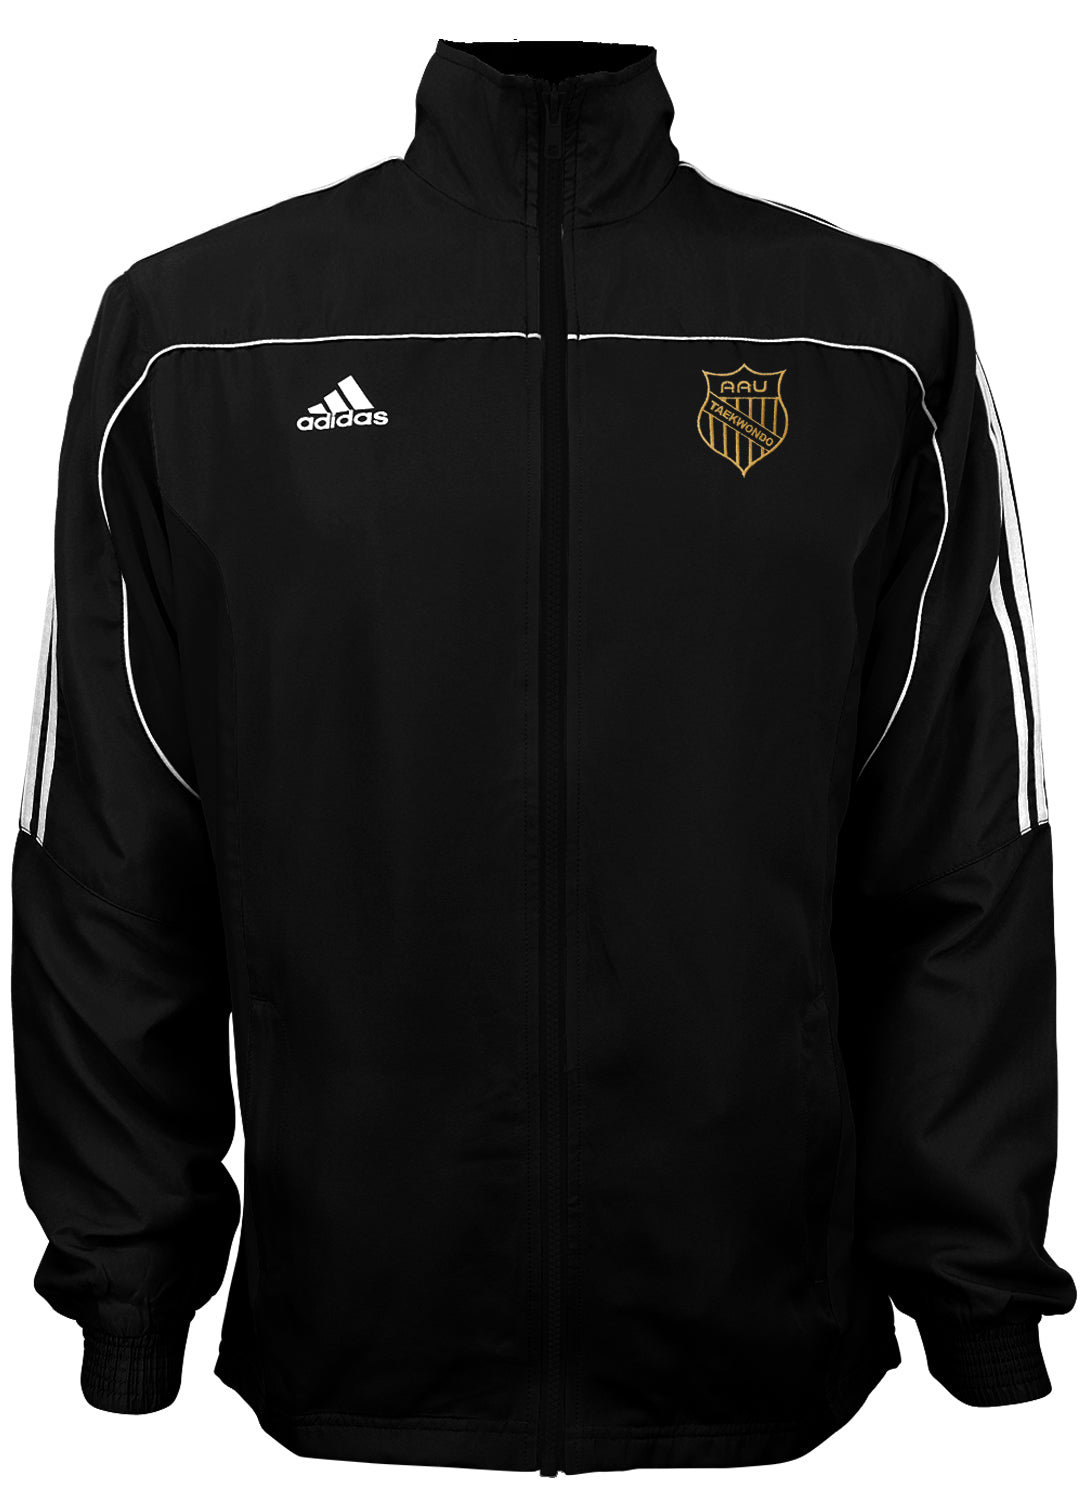 Adidas Gold Track Jackets for Men